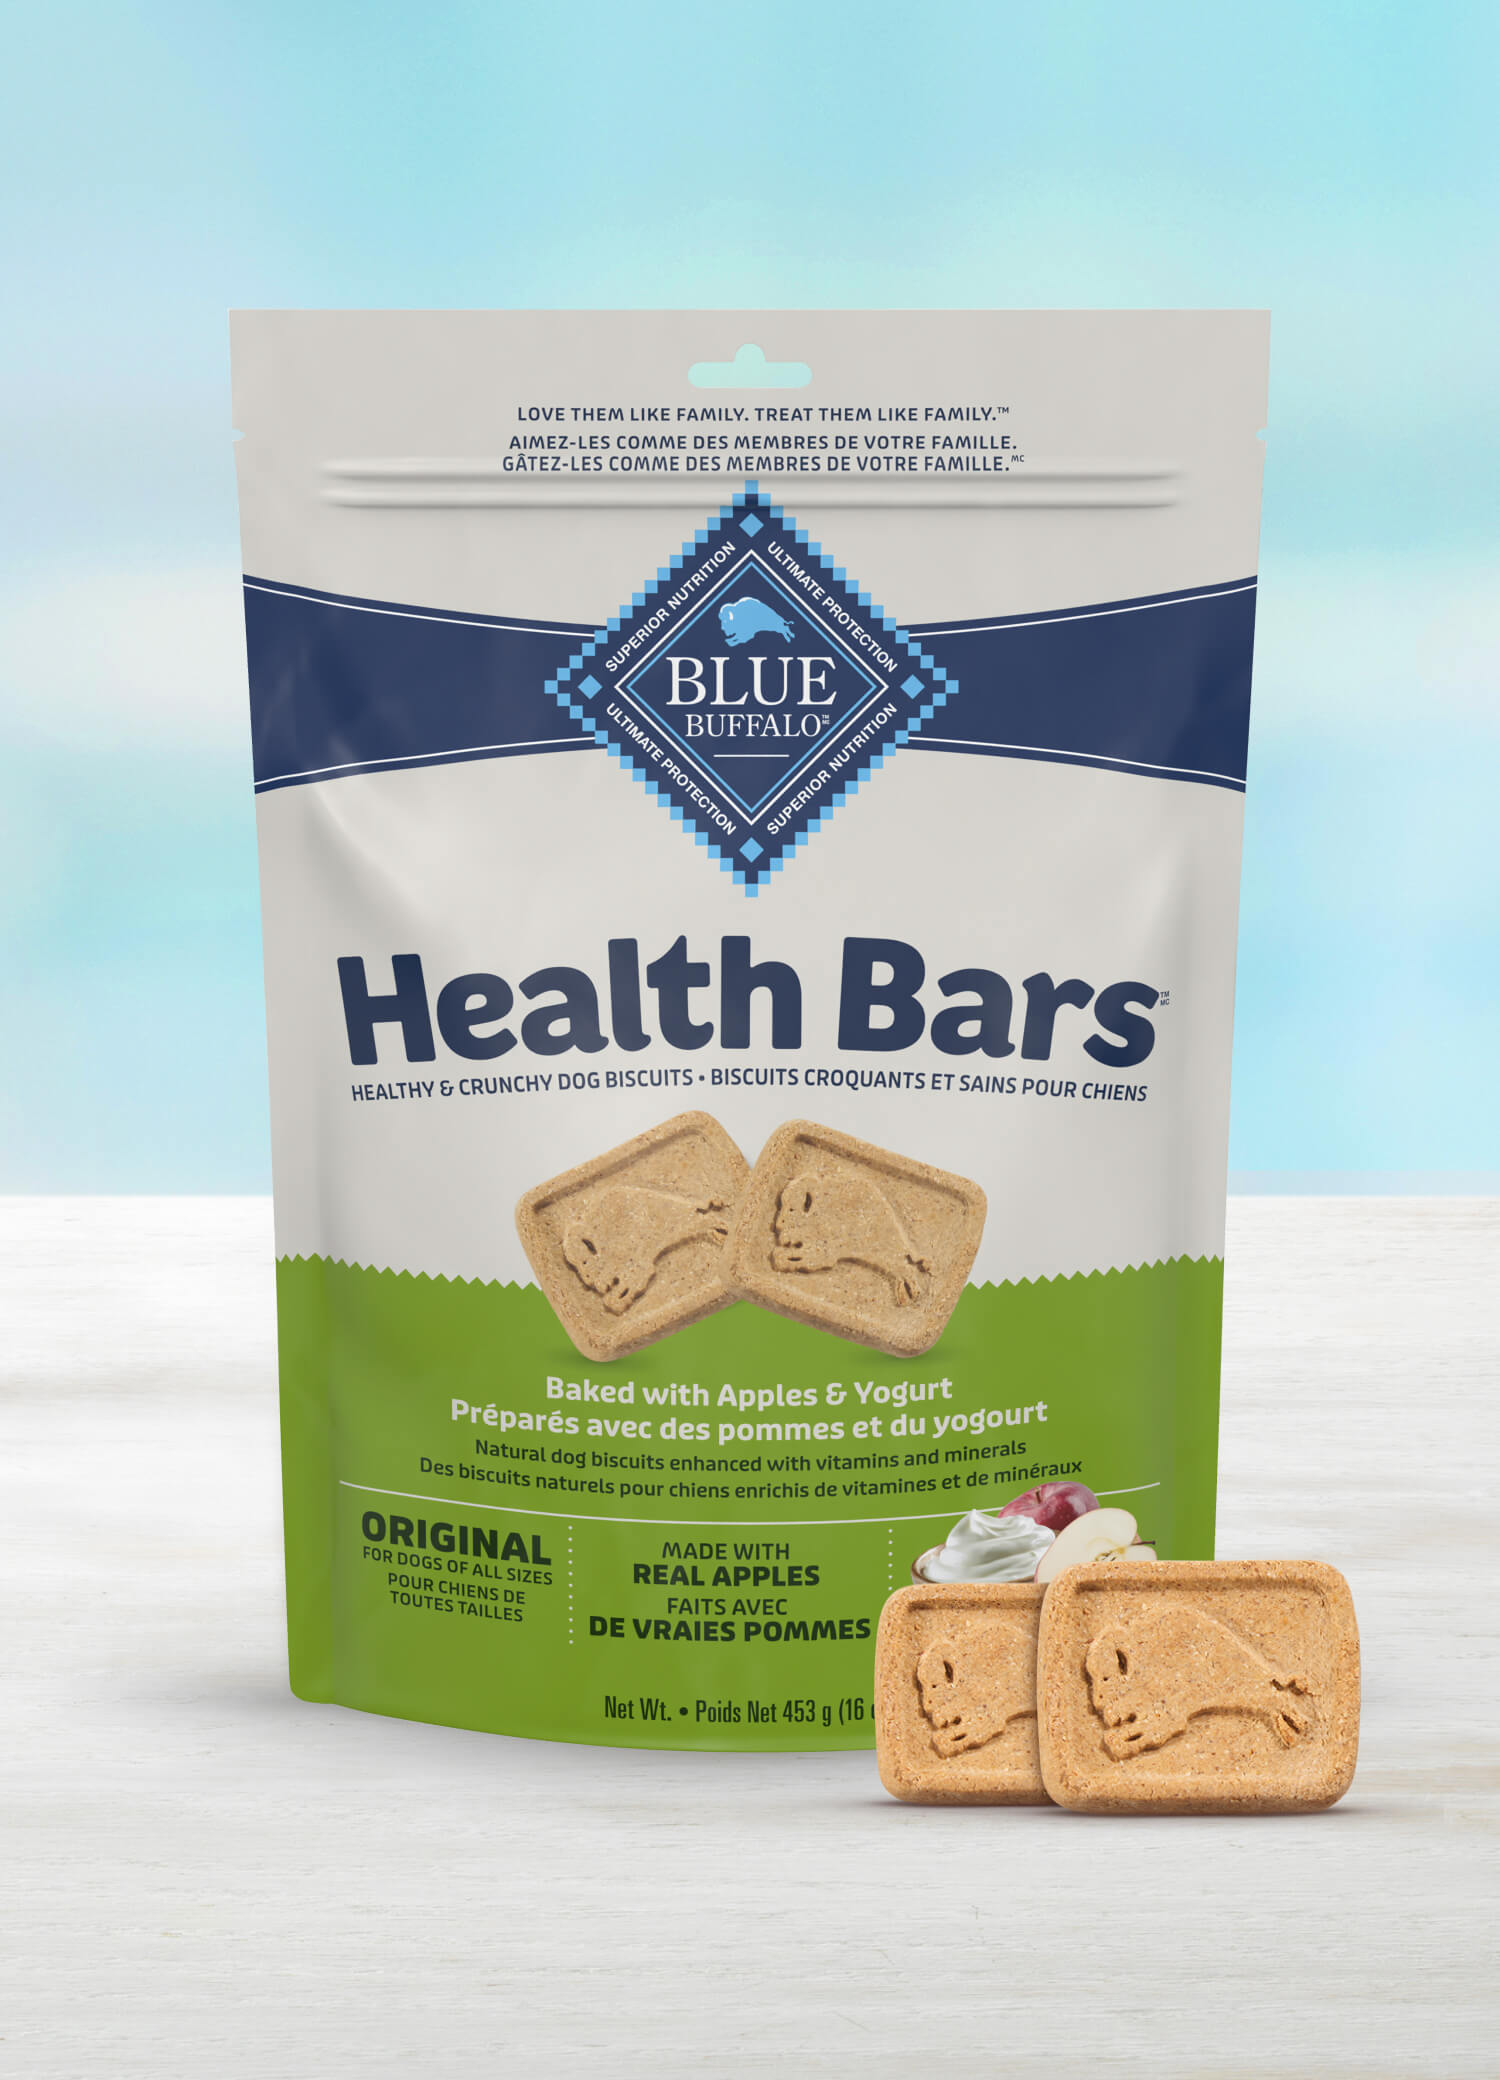 A package of Blue Buffalo Health Bars for dogs, baked with apples and yogurt, showcasing biscuits on the front.